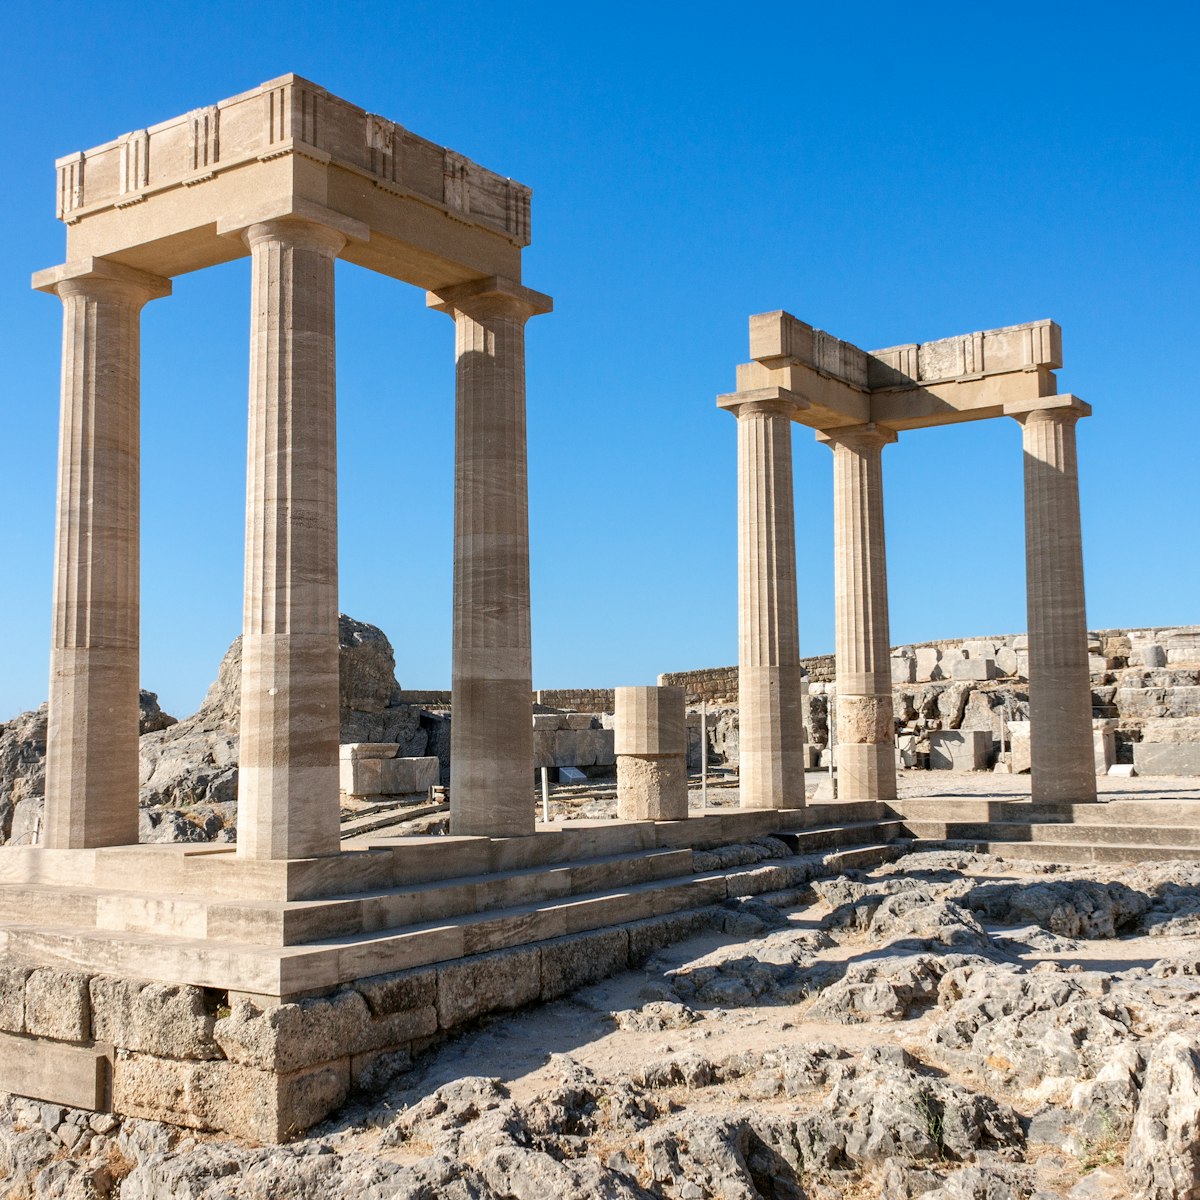 Ruins of the ancient temple on the Acropolis of Lindos.
1513583801
acropolis, acropolis of lindos, ancient, antique, archeology, architecture, classical, clouds, colonnade, column, columns, destination, dodecanese, dorian, doric, europe, excursion, fortress, greece, greek, heritage, historic, history, island, landscape, lindos, monument, old, old lindos, old rhodes, old town, rhodes, ruins, temple, temple of athena, tourism, travel